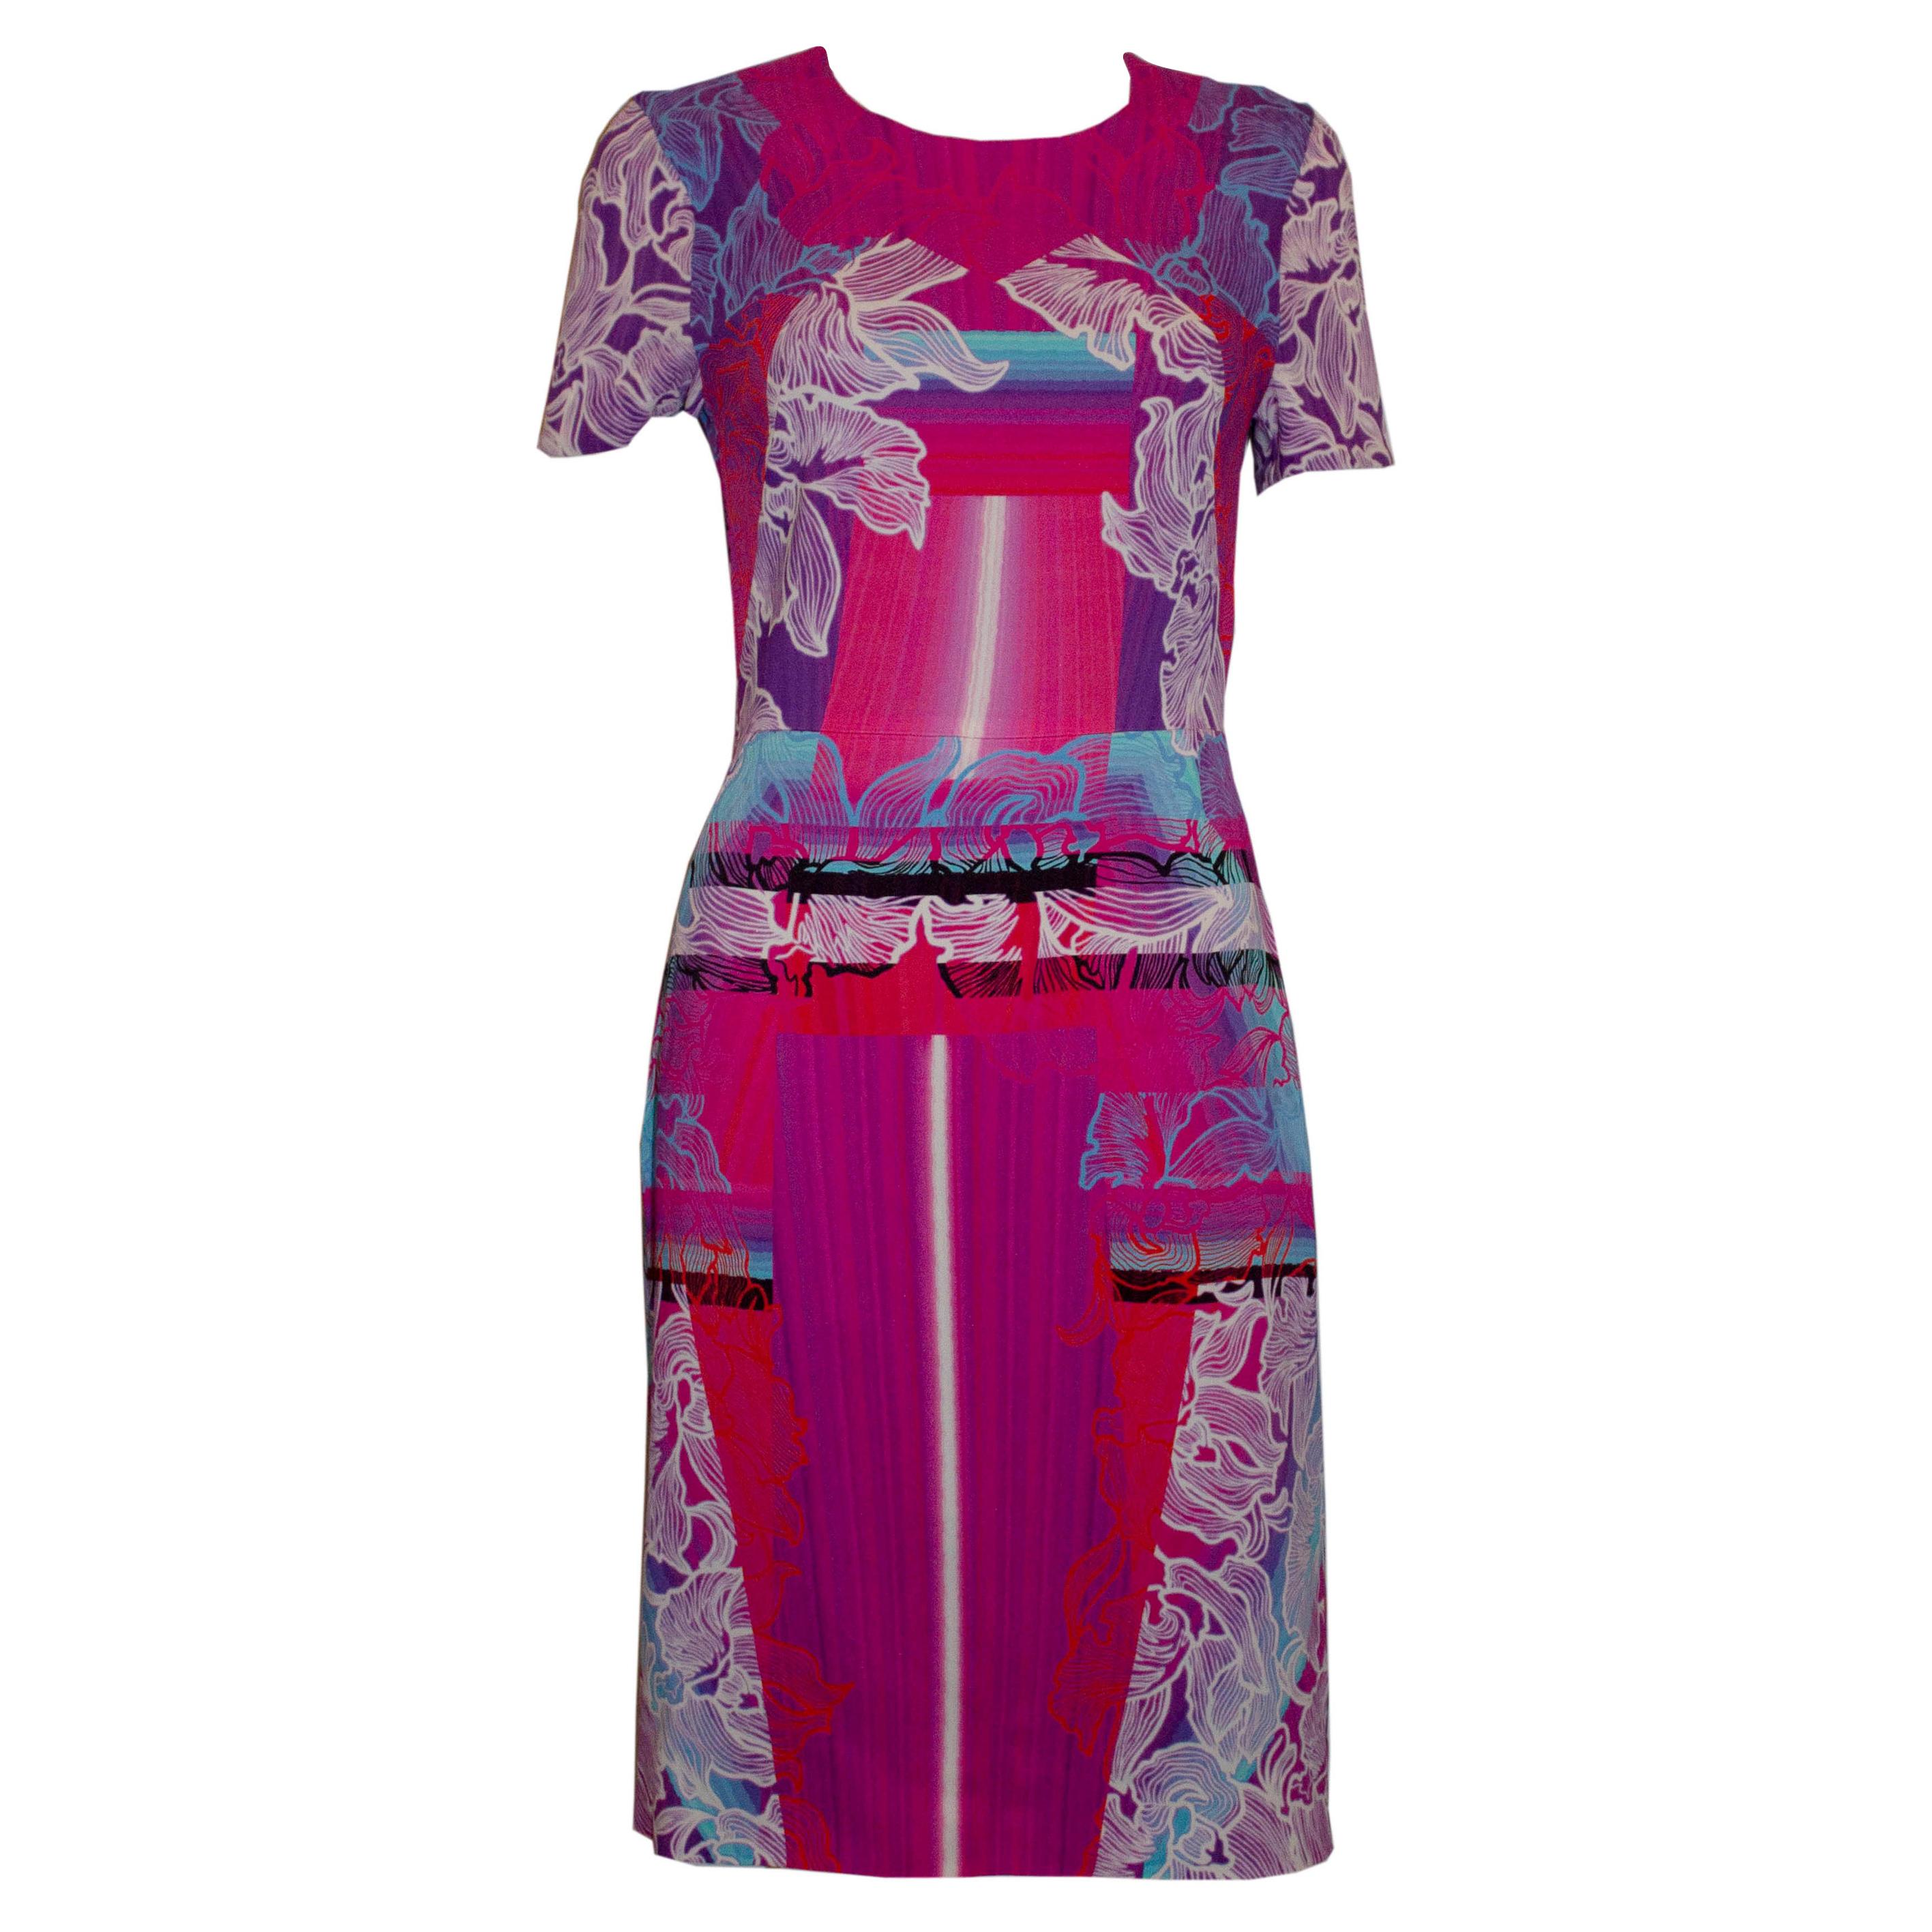 Peter Pilotto Colourful Day dress For Sale